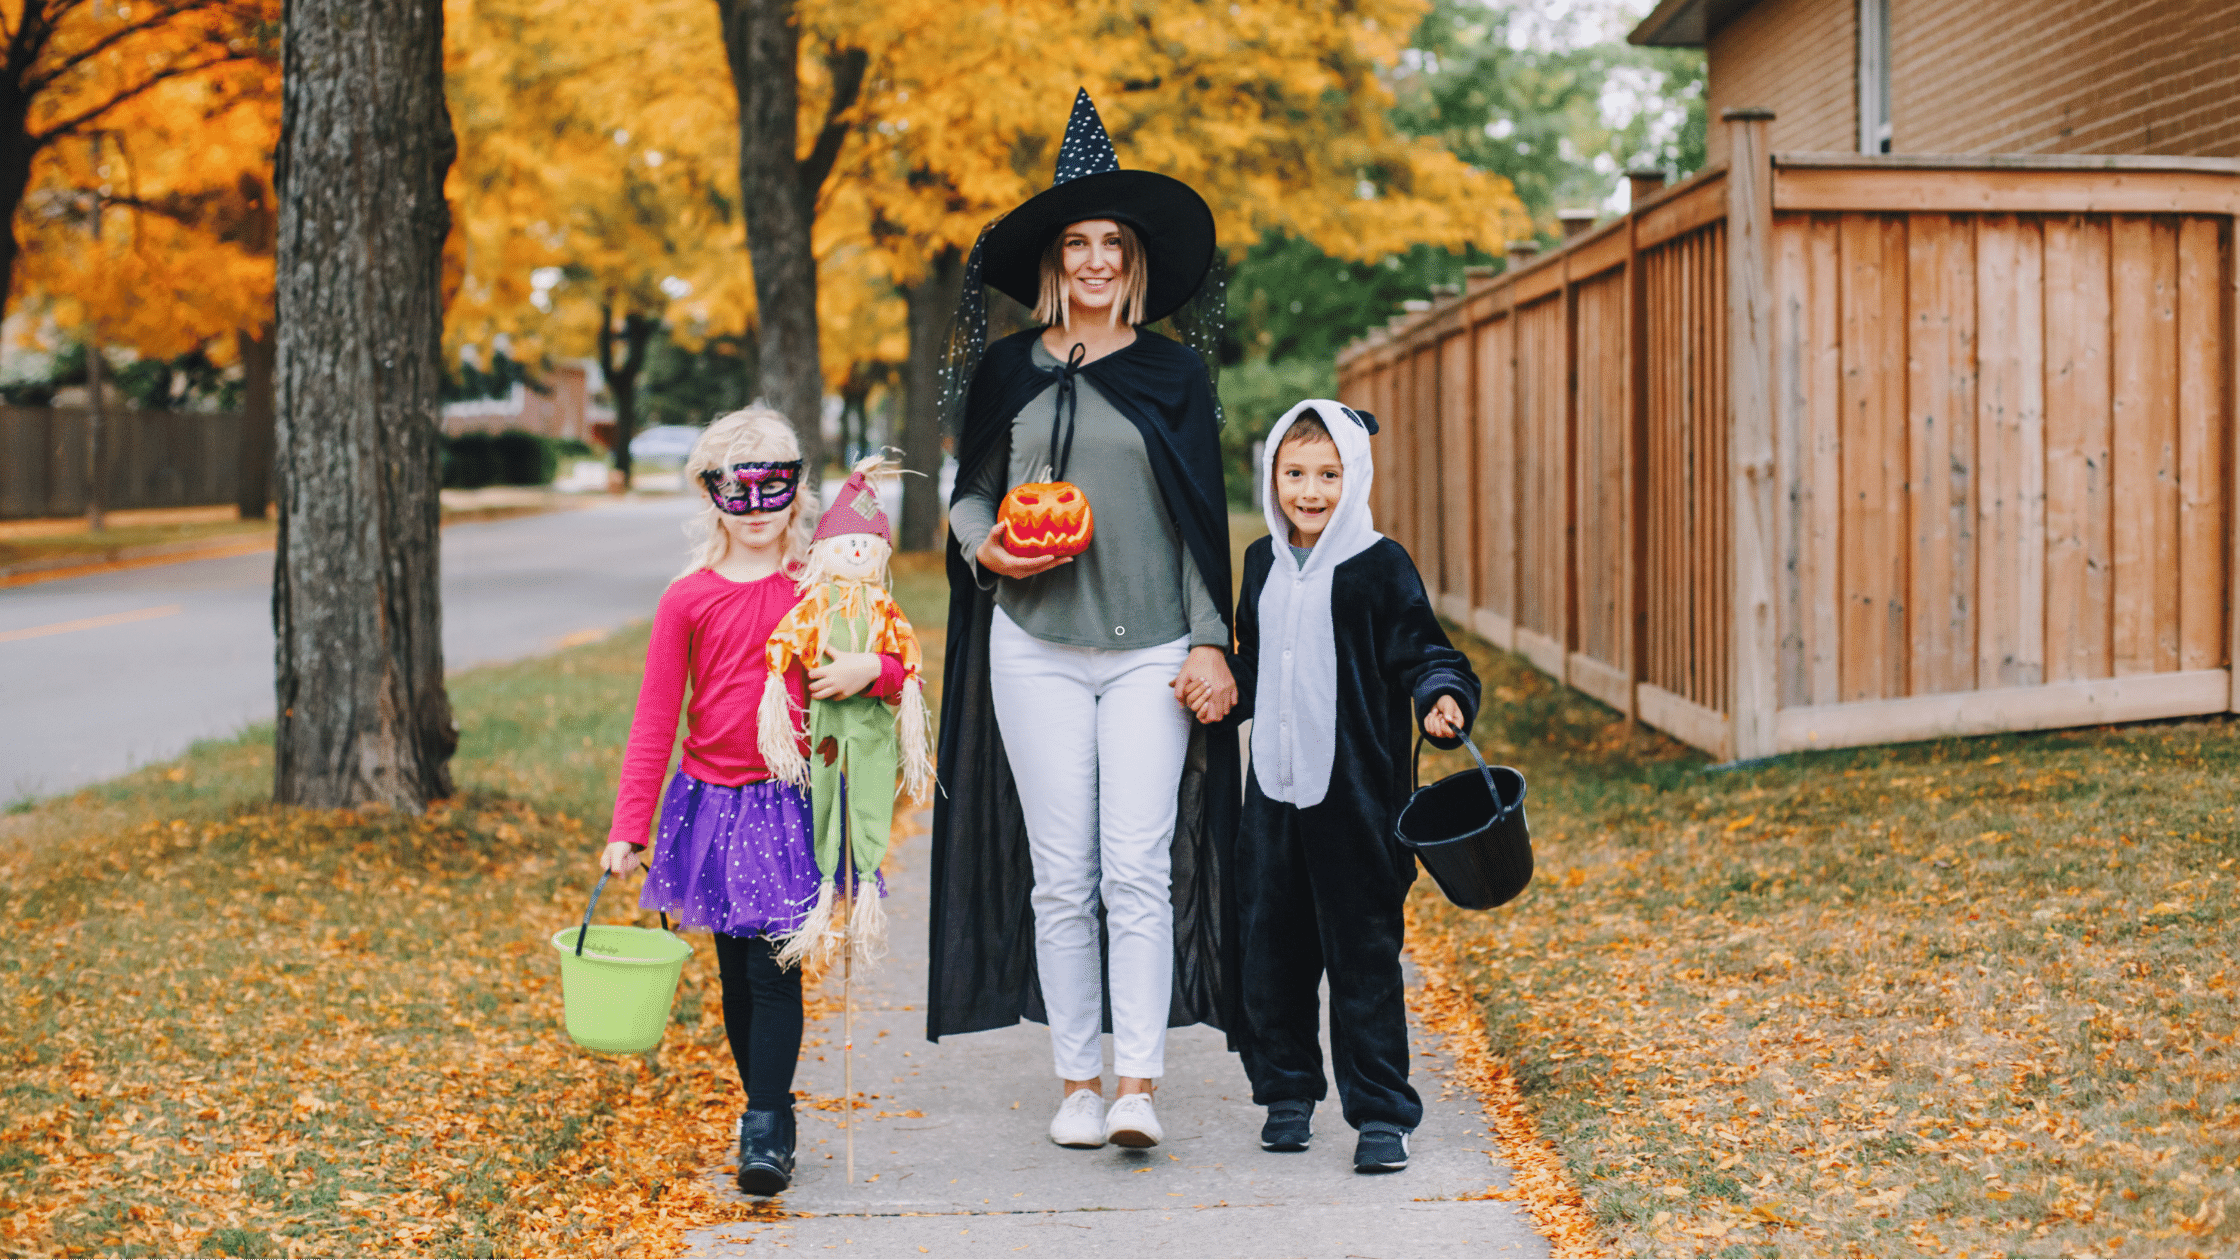 A woman dressed as a witch and her children walking down a sidewalk, ensuring safety.